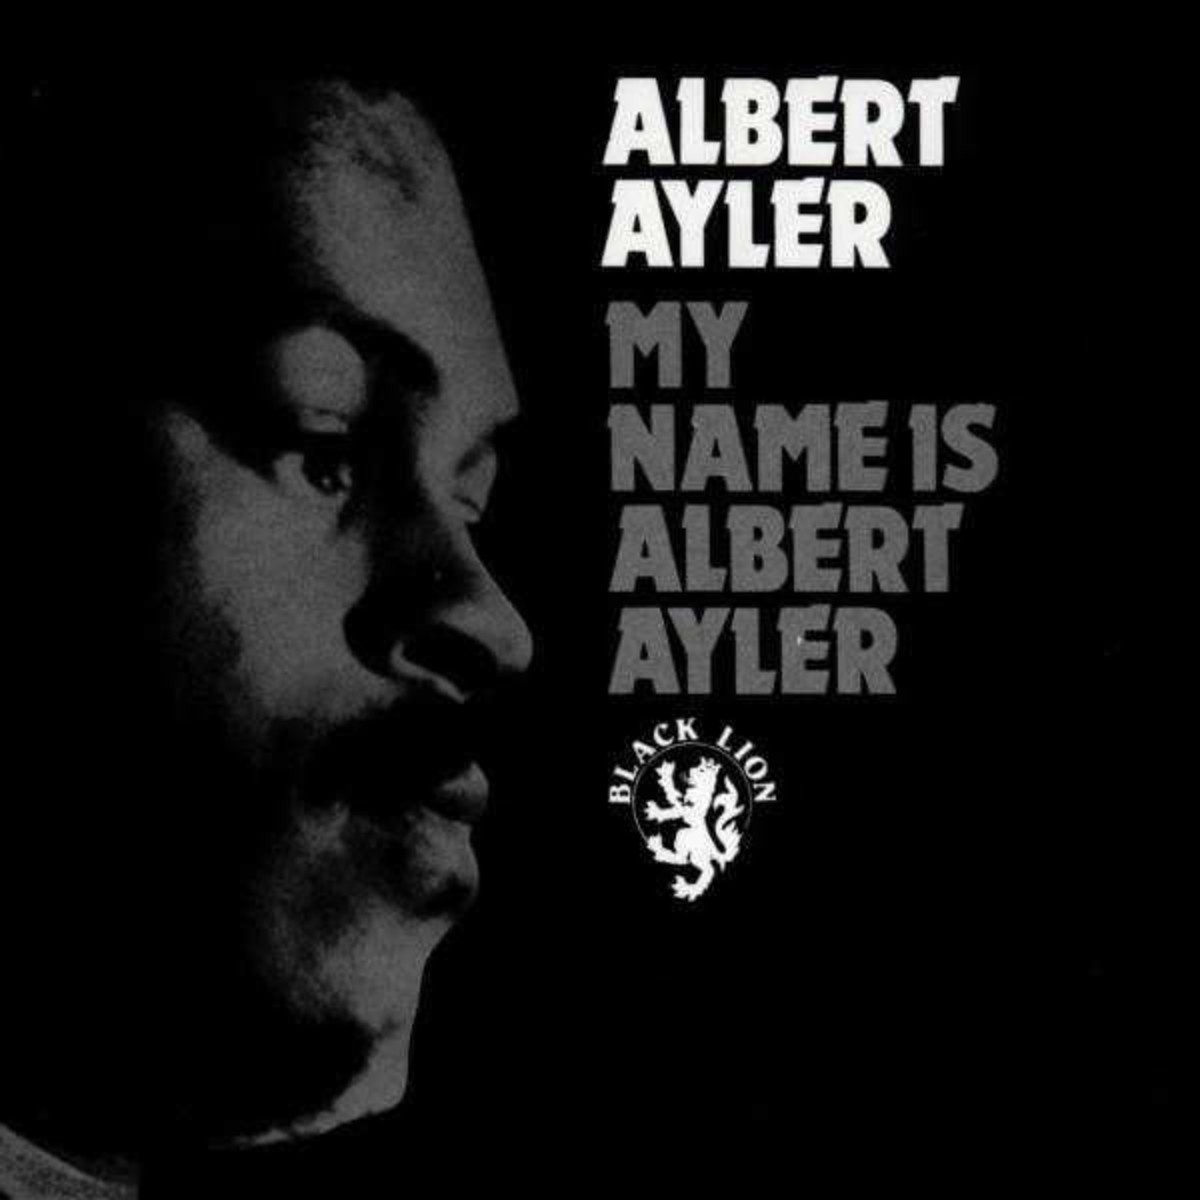 Introduction by Albert Ayler